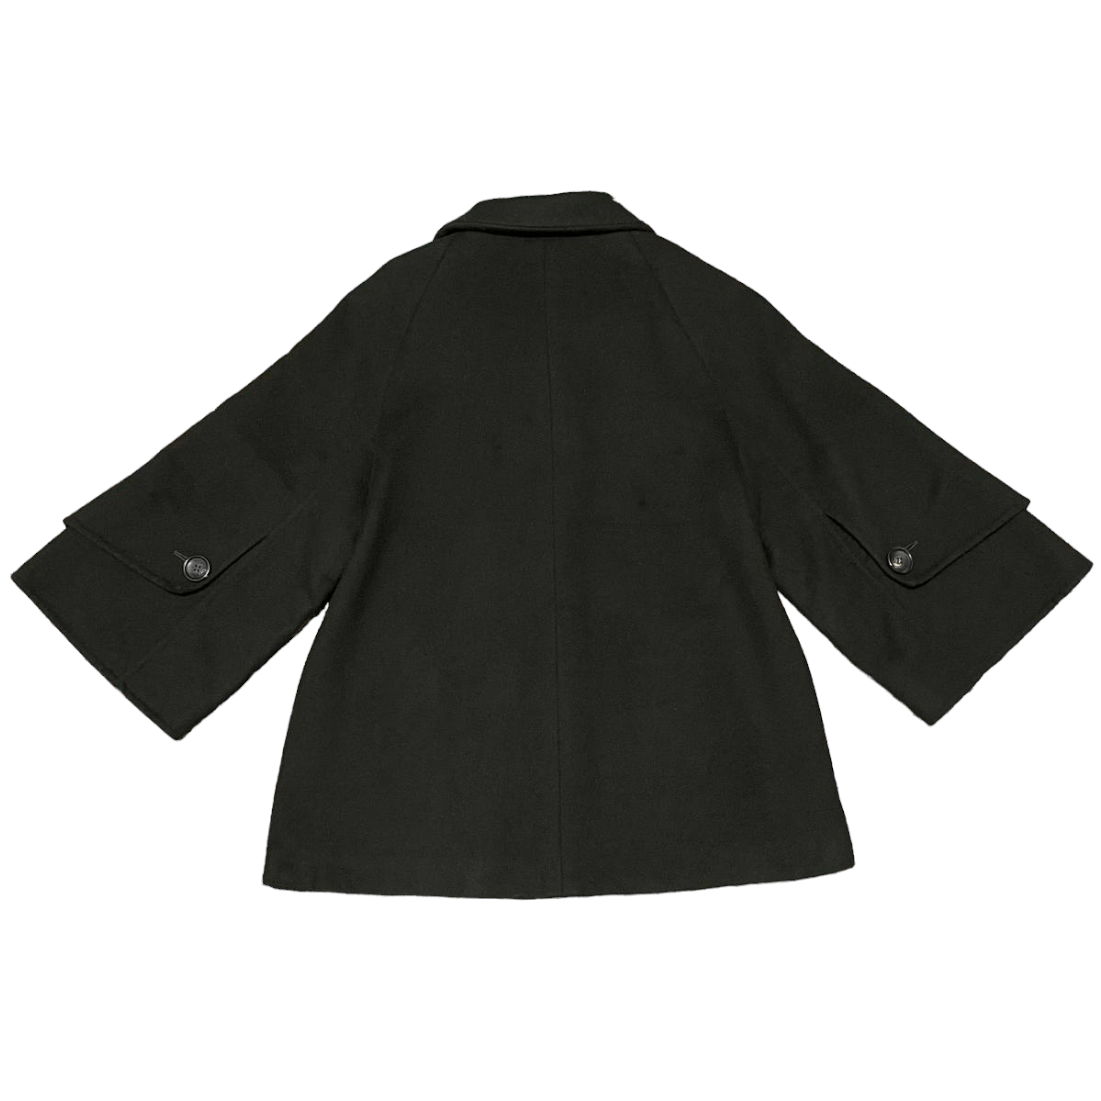 Archival Clothing - Archive Max Mara Made in Italy Wool Coat - 11